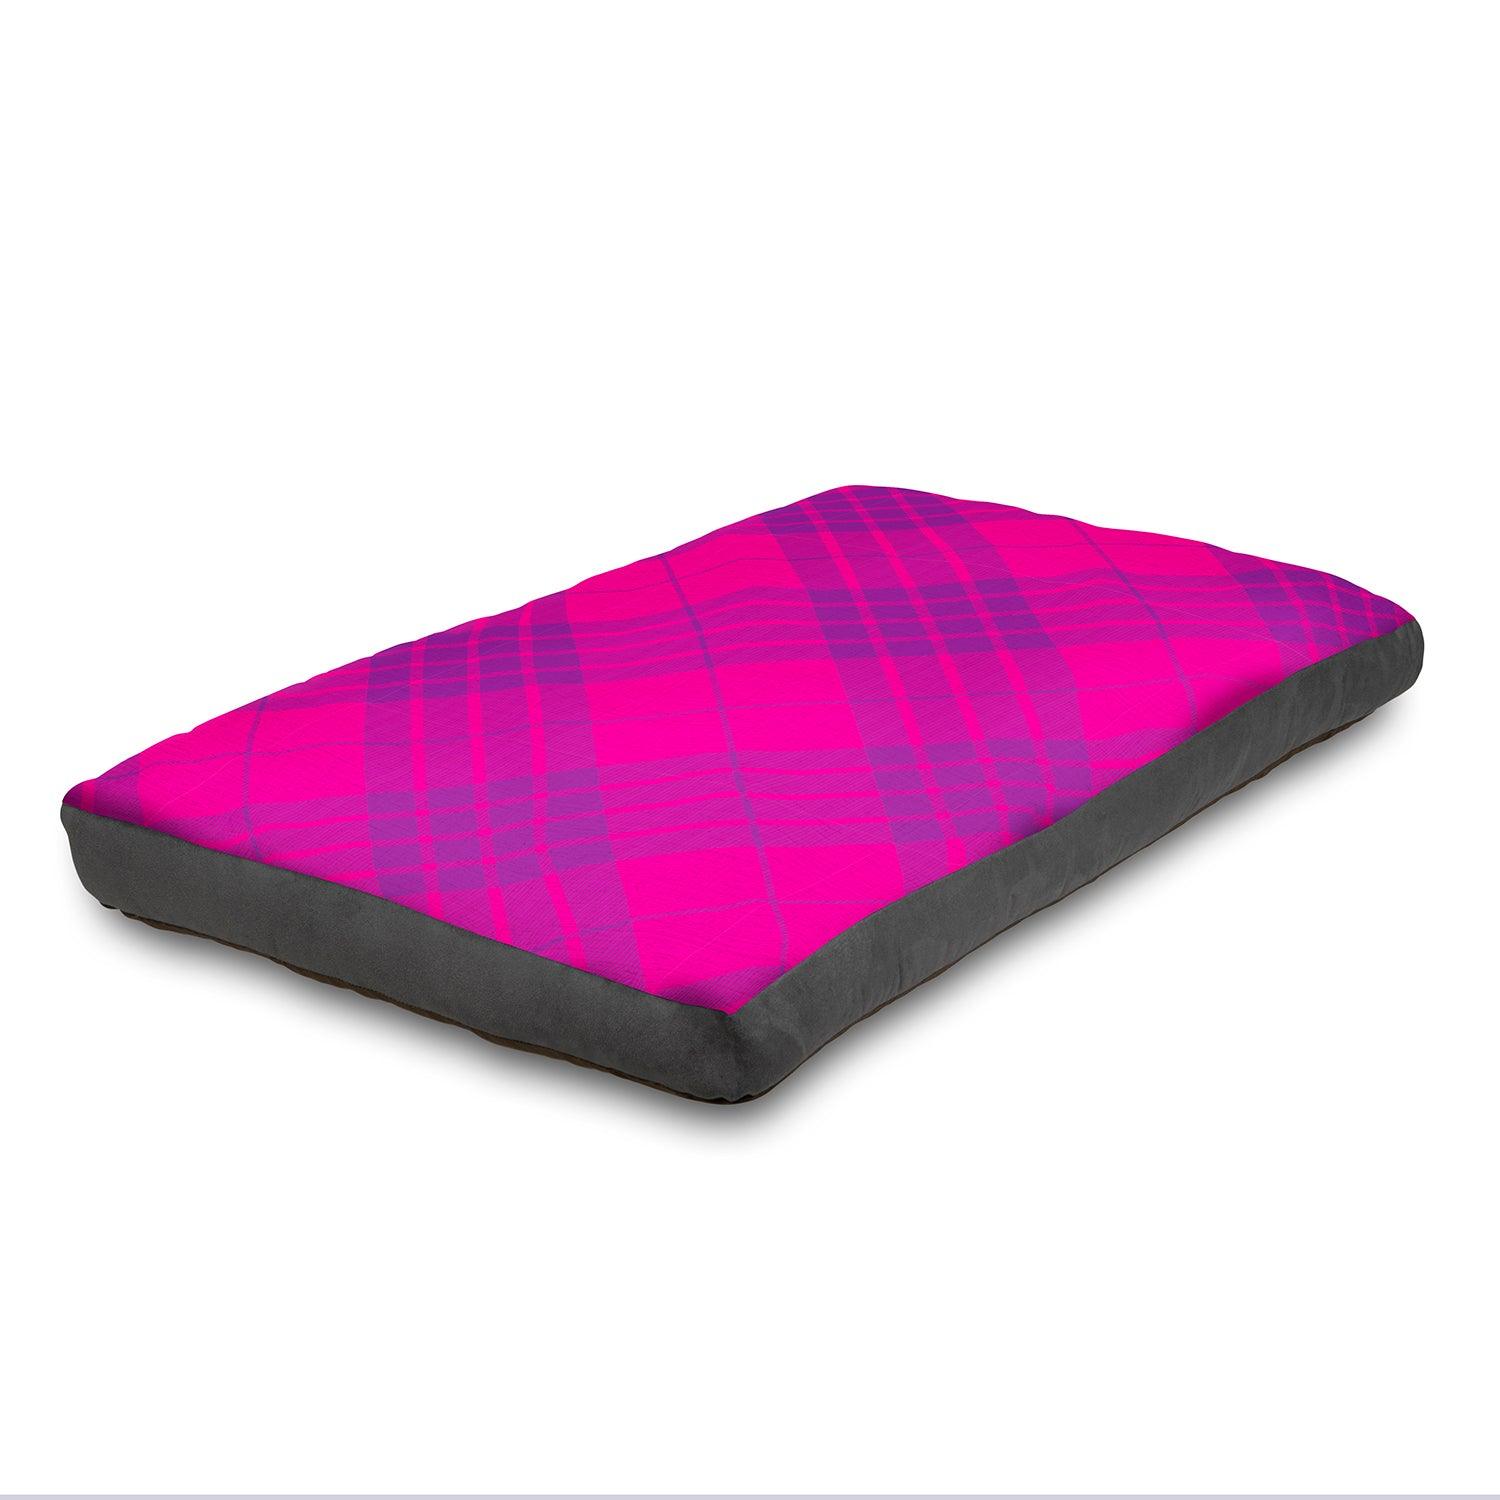 View Super Comfy Dog Bed Soft and Fluffy with Washable Cover Medium 100 cm x 65 cm Pink information